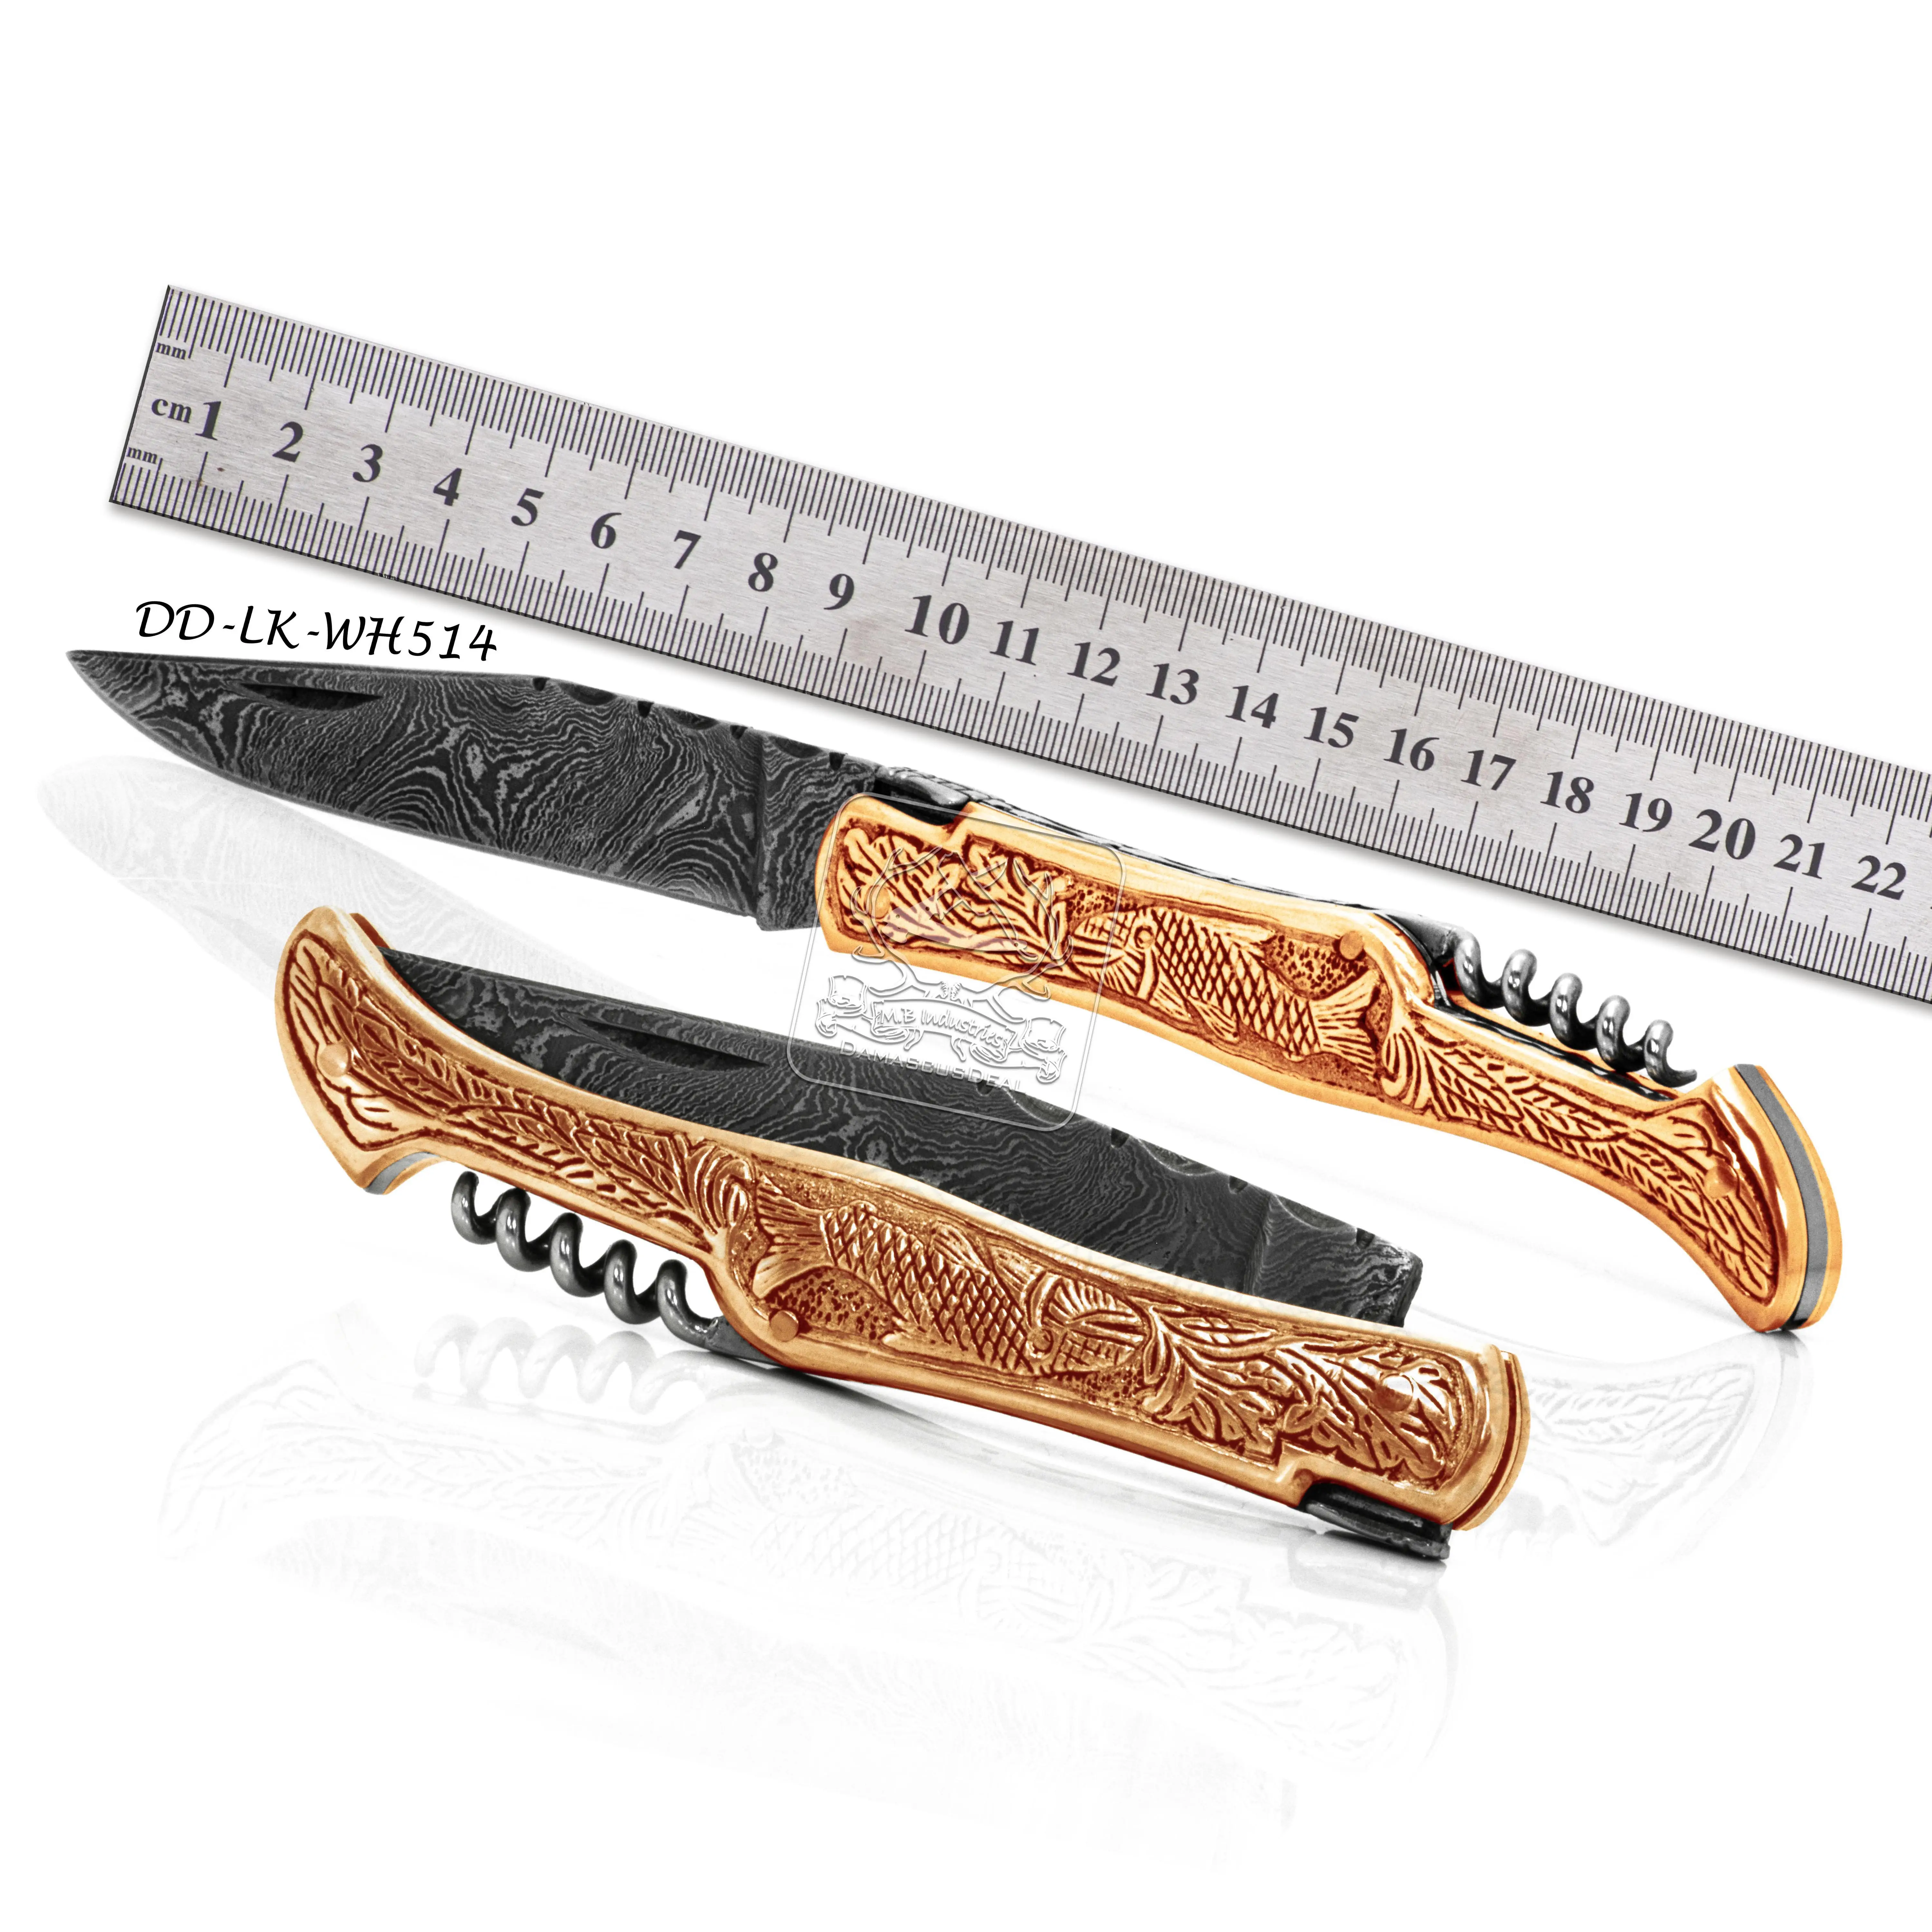 Wholesale Damascus Steel Laguiole Pocket Knife DD-LK-WH514 Engraved Stainless Steel, Brass and Copper Handle with Cow Leather